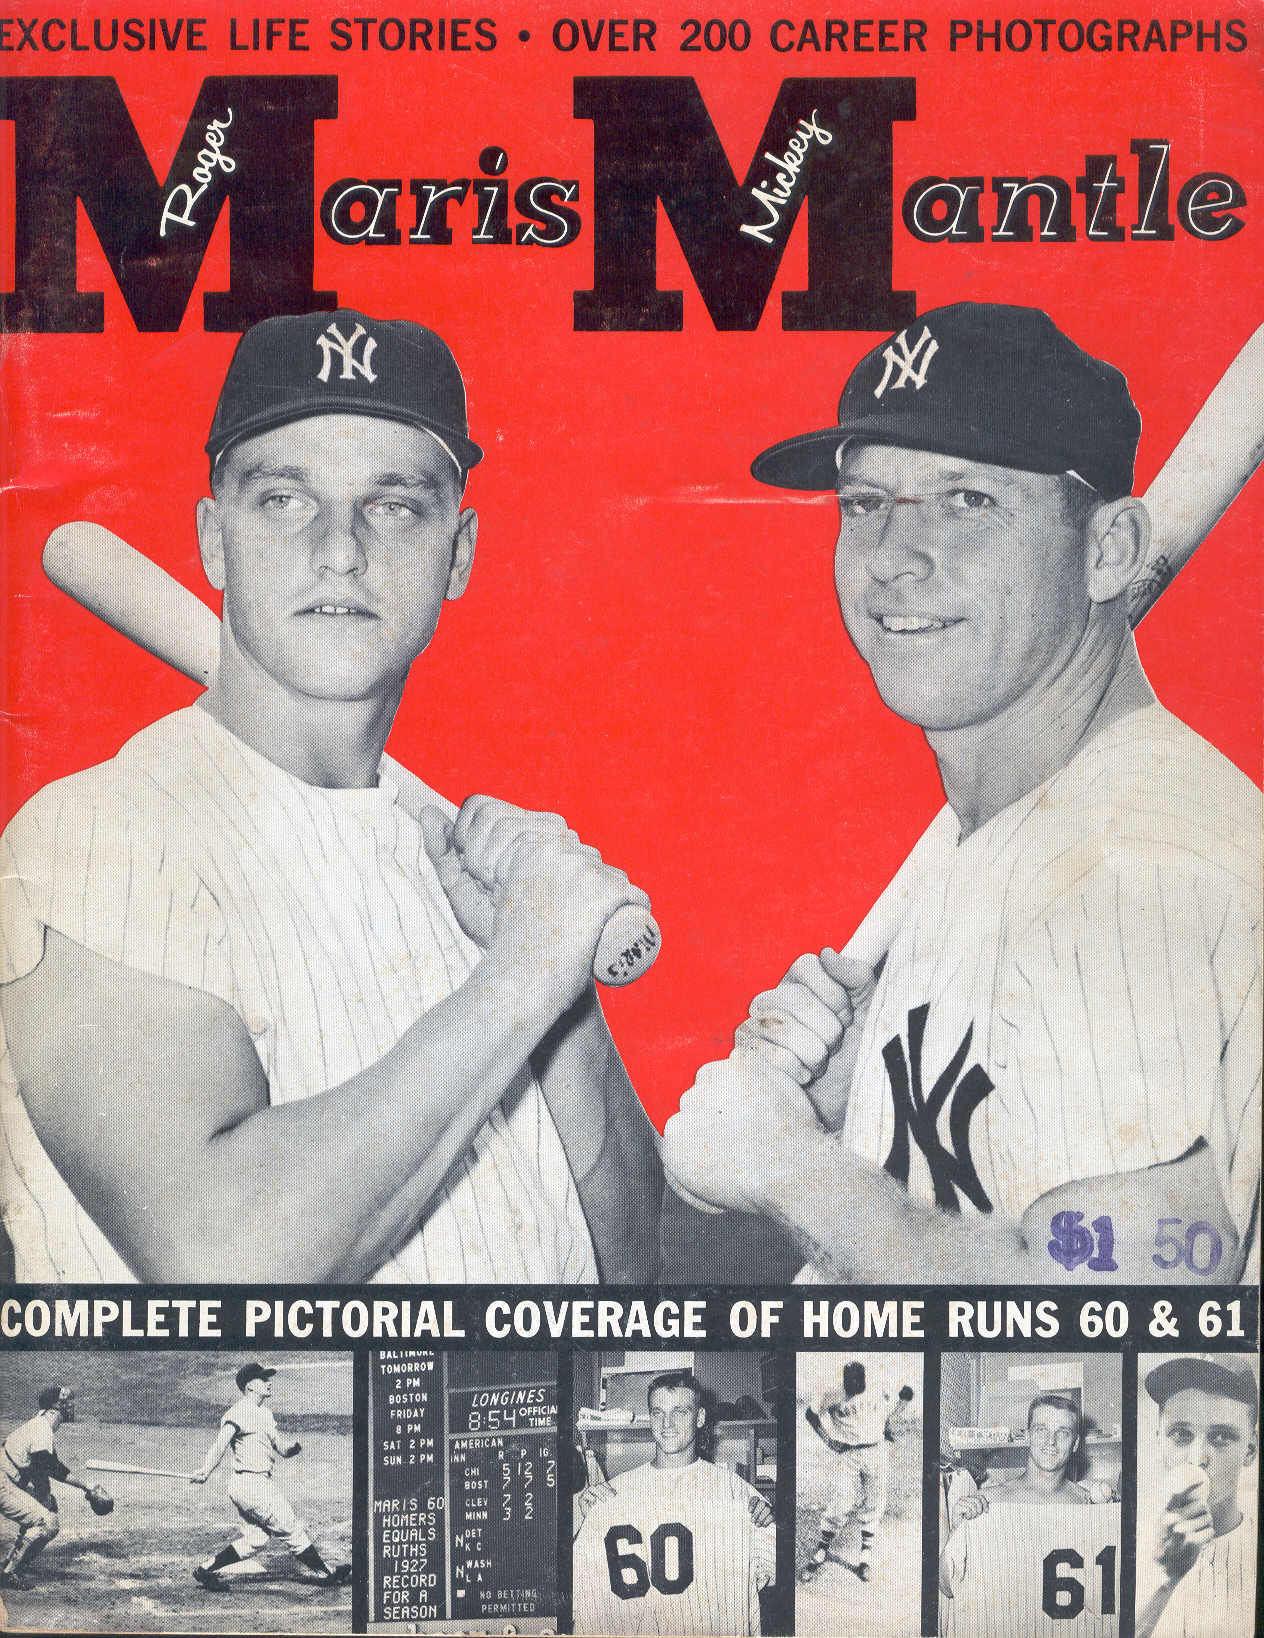 Safe at Home!, Mickey Mantle, Roger Maris, 1962 | Large Solid-Faced Canvas Wall Art Print | Great Big Canvas